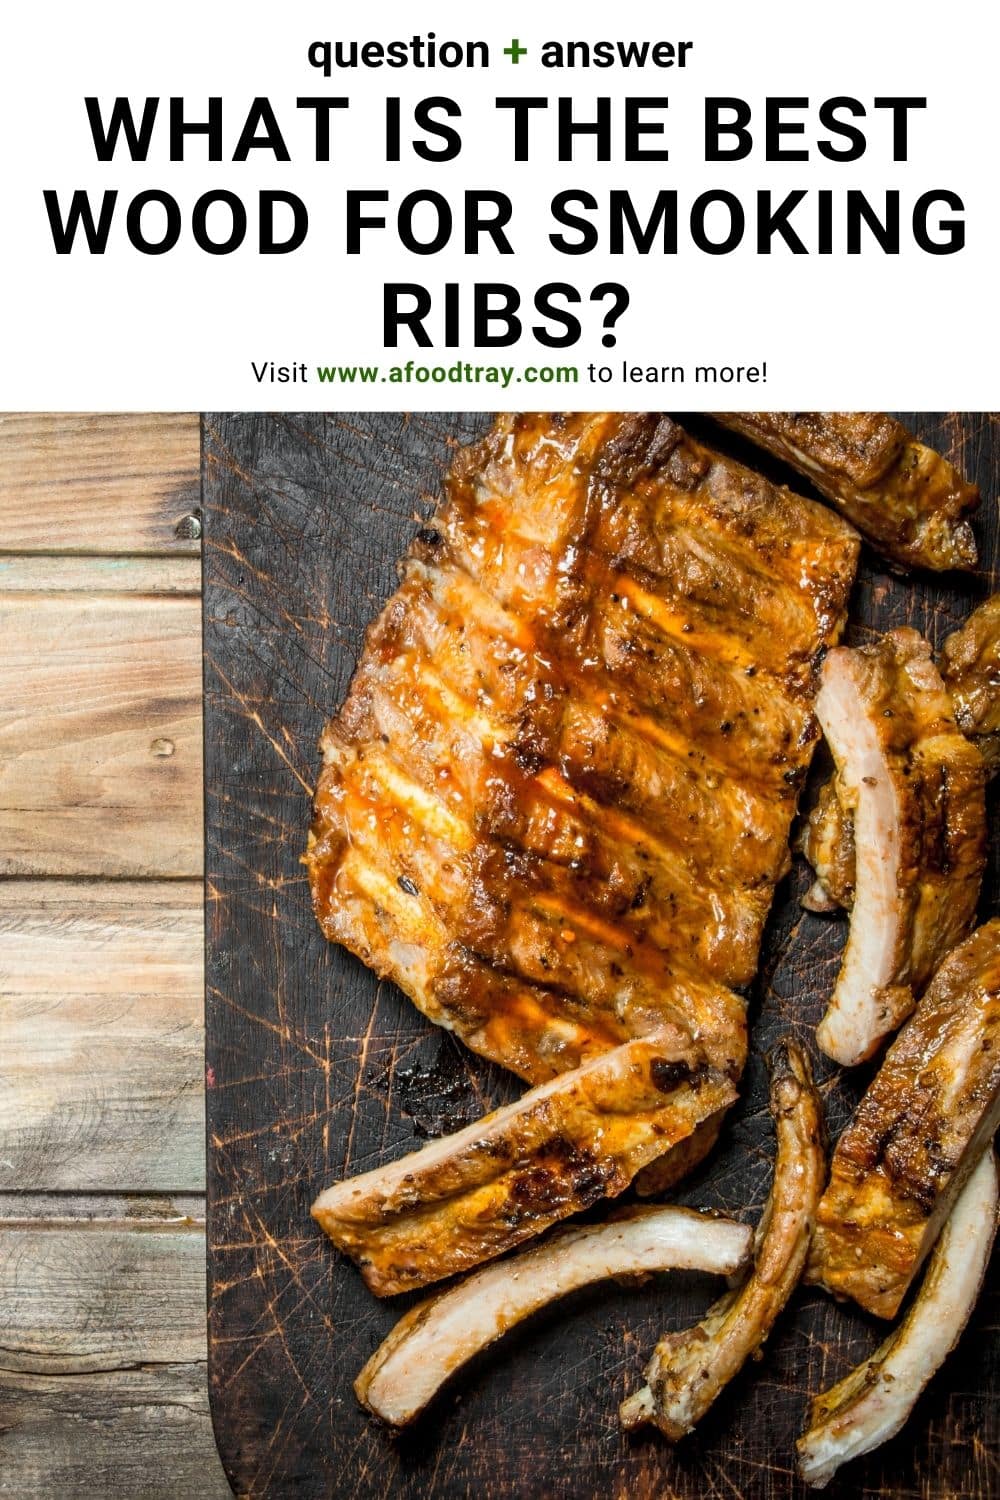 What is the best wood for smoking ribs